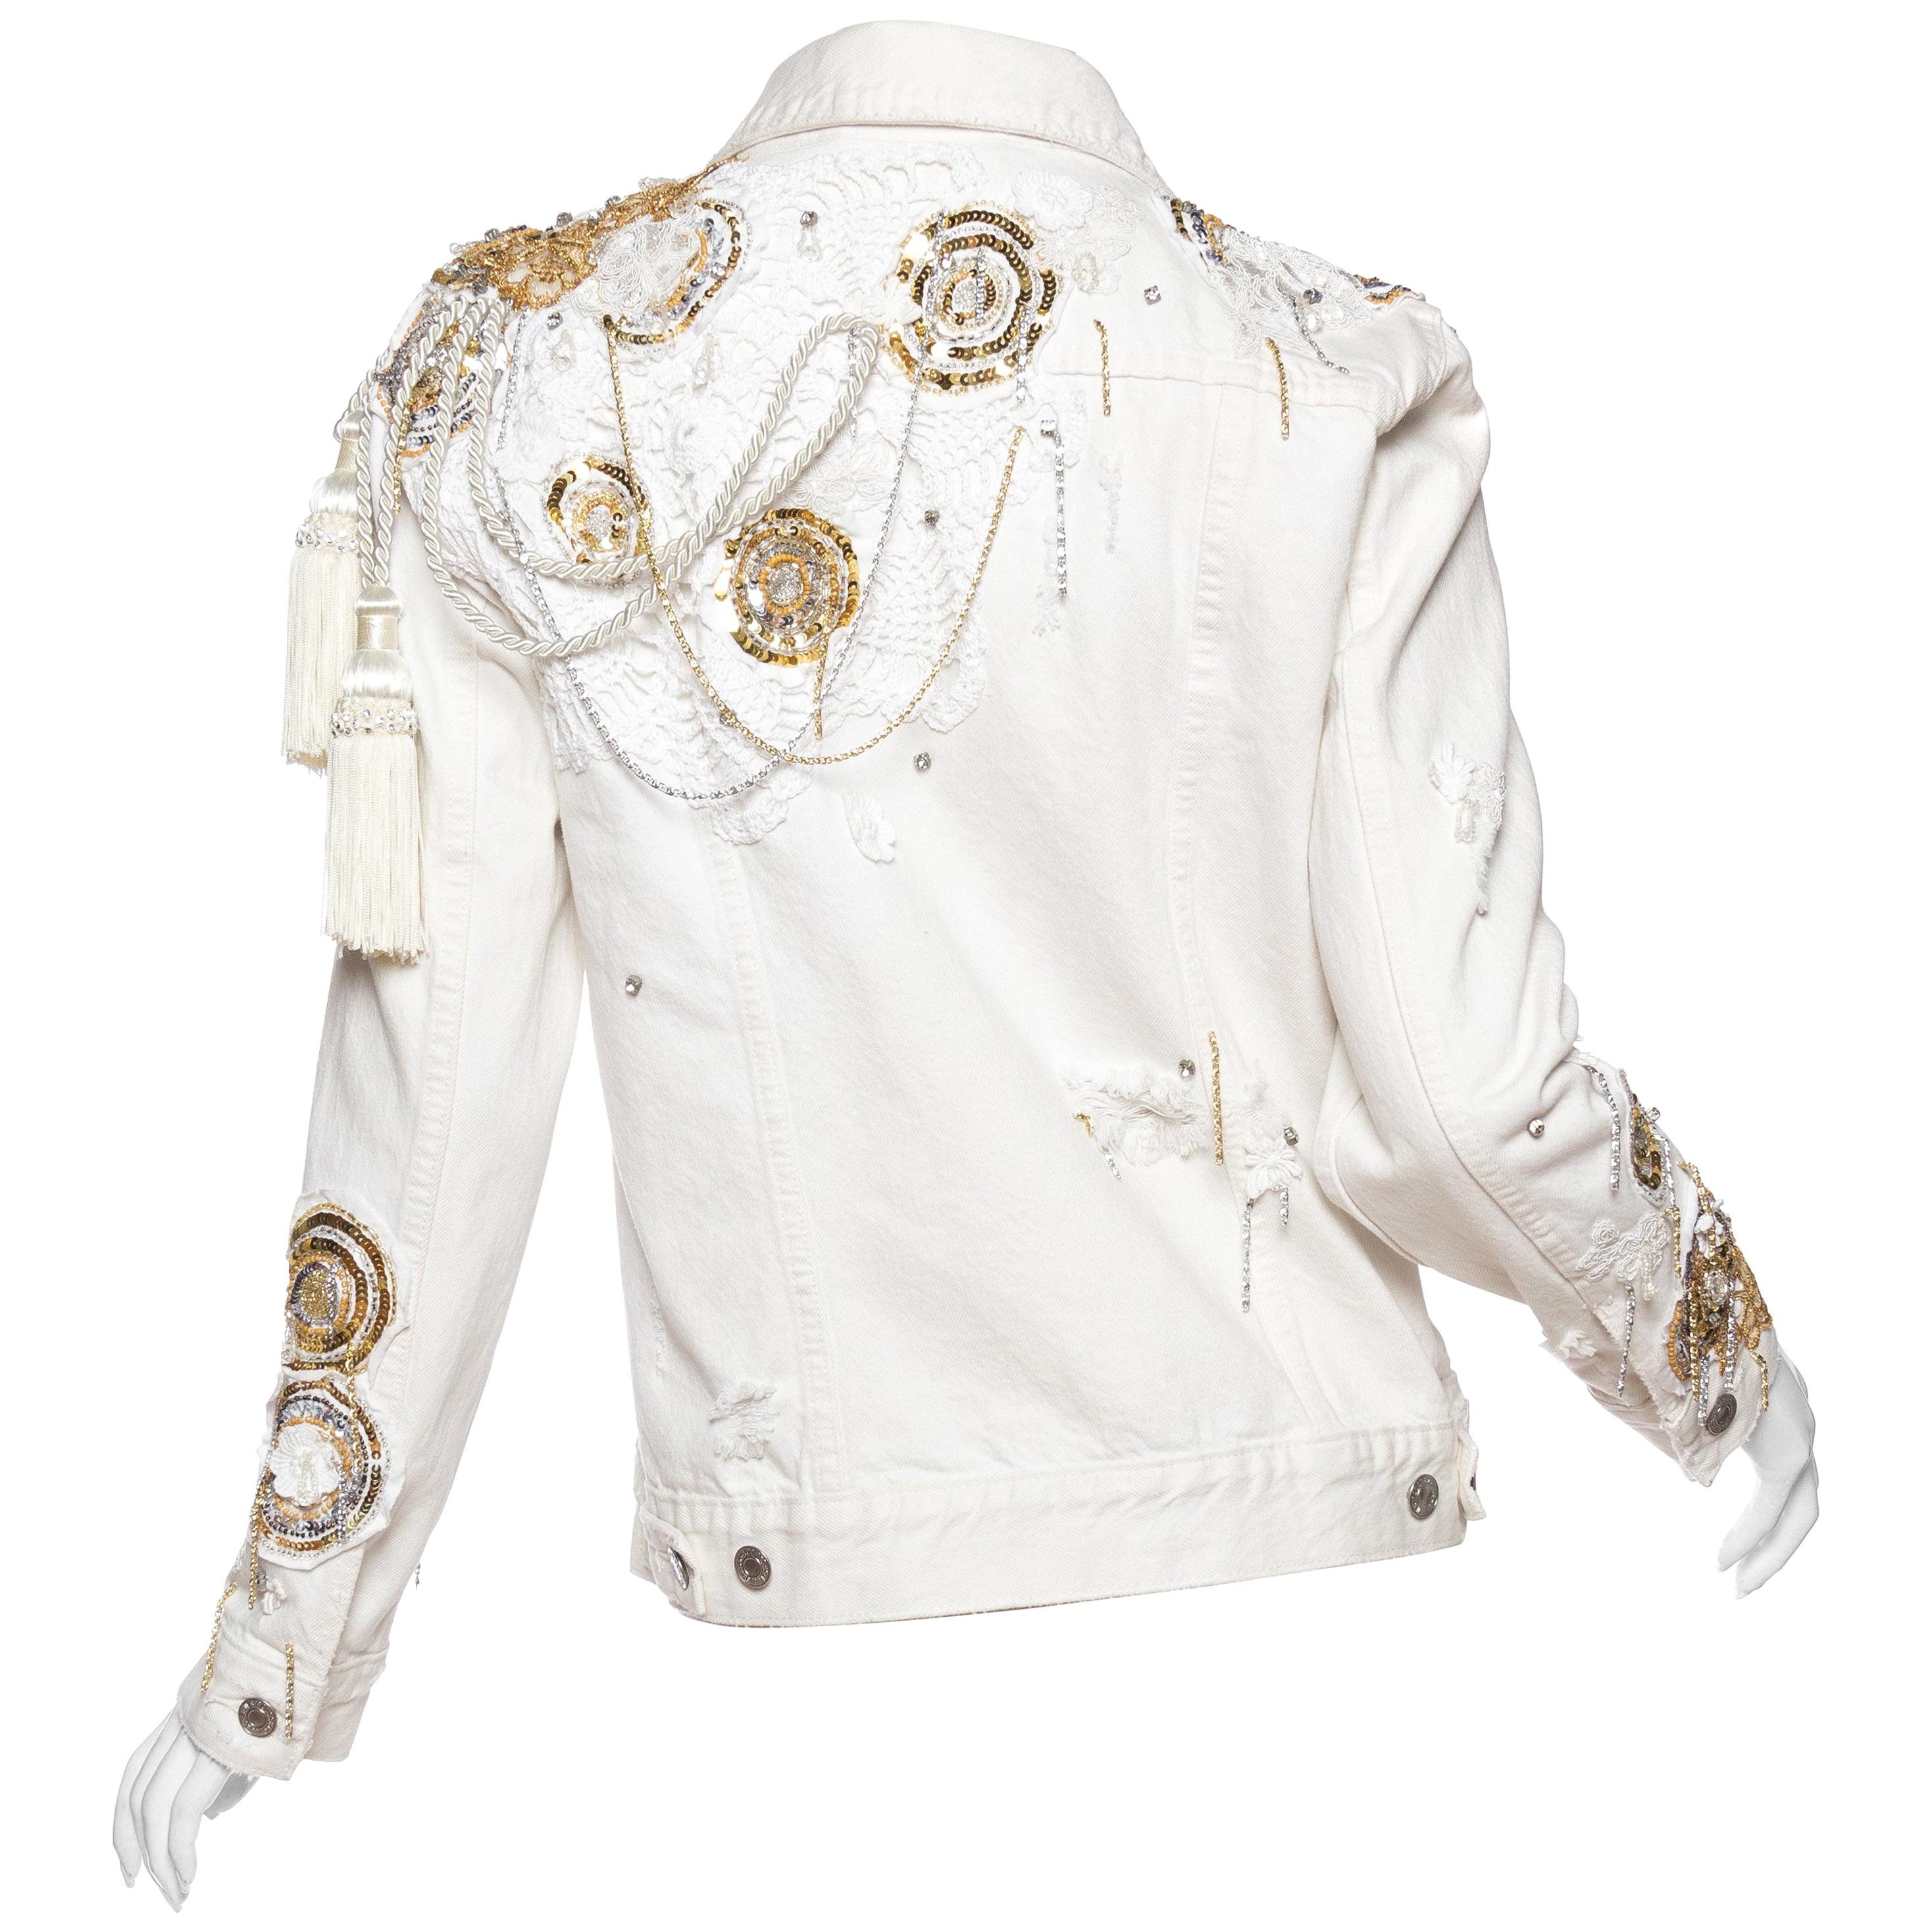 MORPHEW COLLECTION X UNLEASHED White Cotton Denim Gold Sequin, Lace & Crystal E